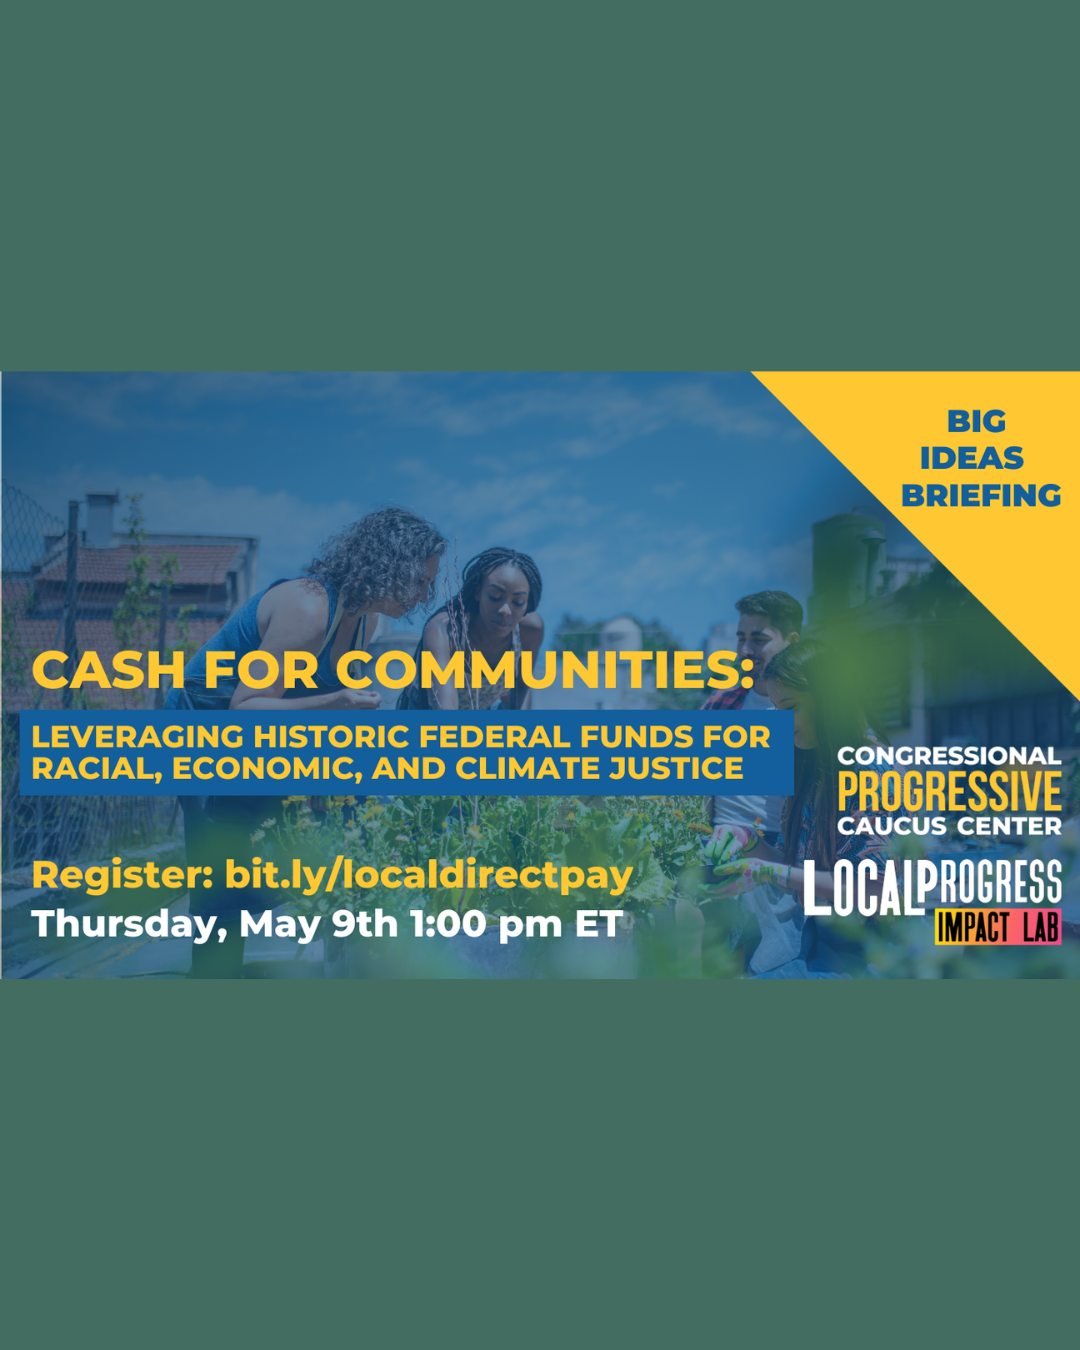 🔋 Want to help your community take advantage of clean energy tax credits? 

Learn how you and other leaders can champion Direct Pay from the Inflation Reduction Act and empower your community! The Direct Pay program enables community-based organizat